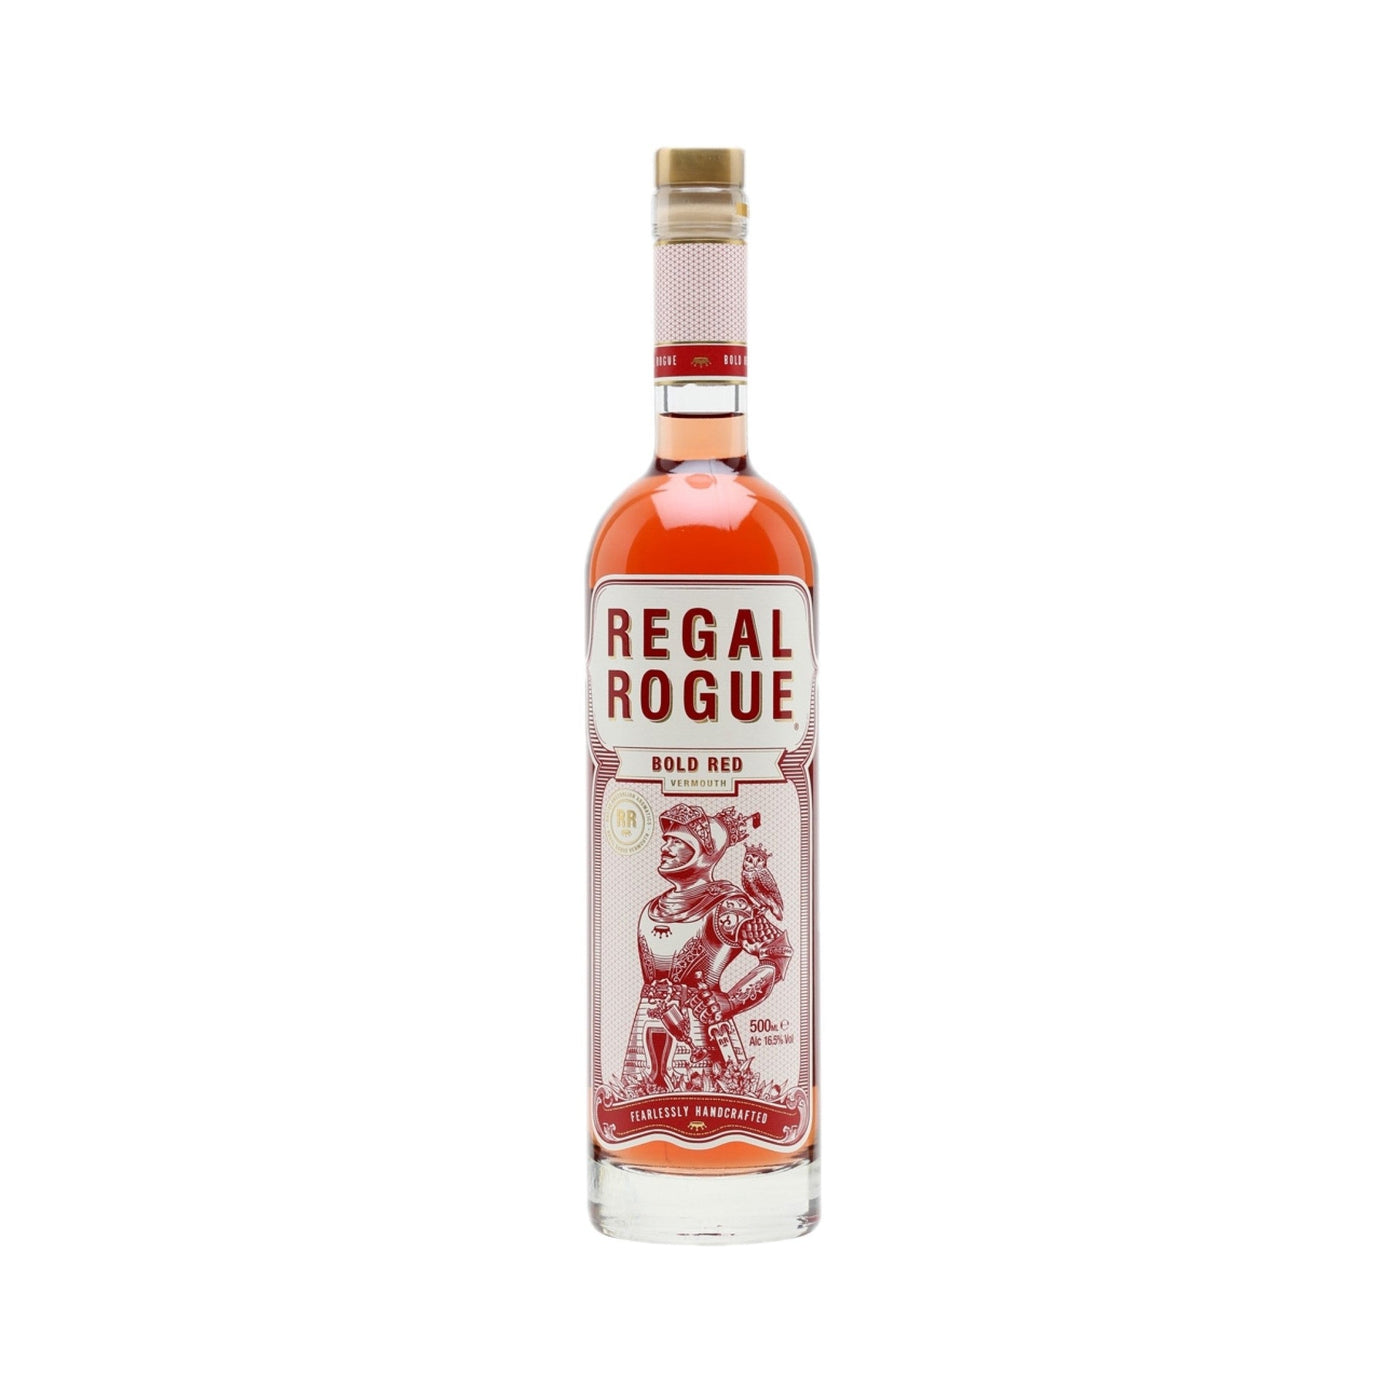 Regal Rogue Bold Red 50cl